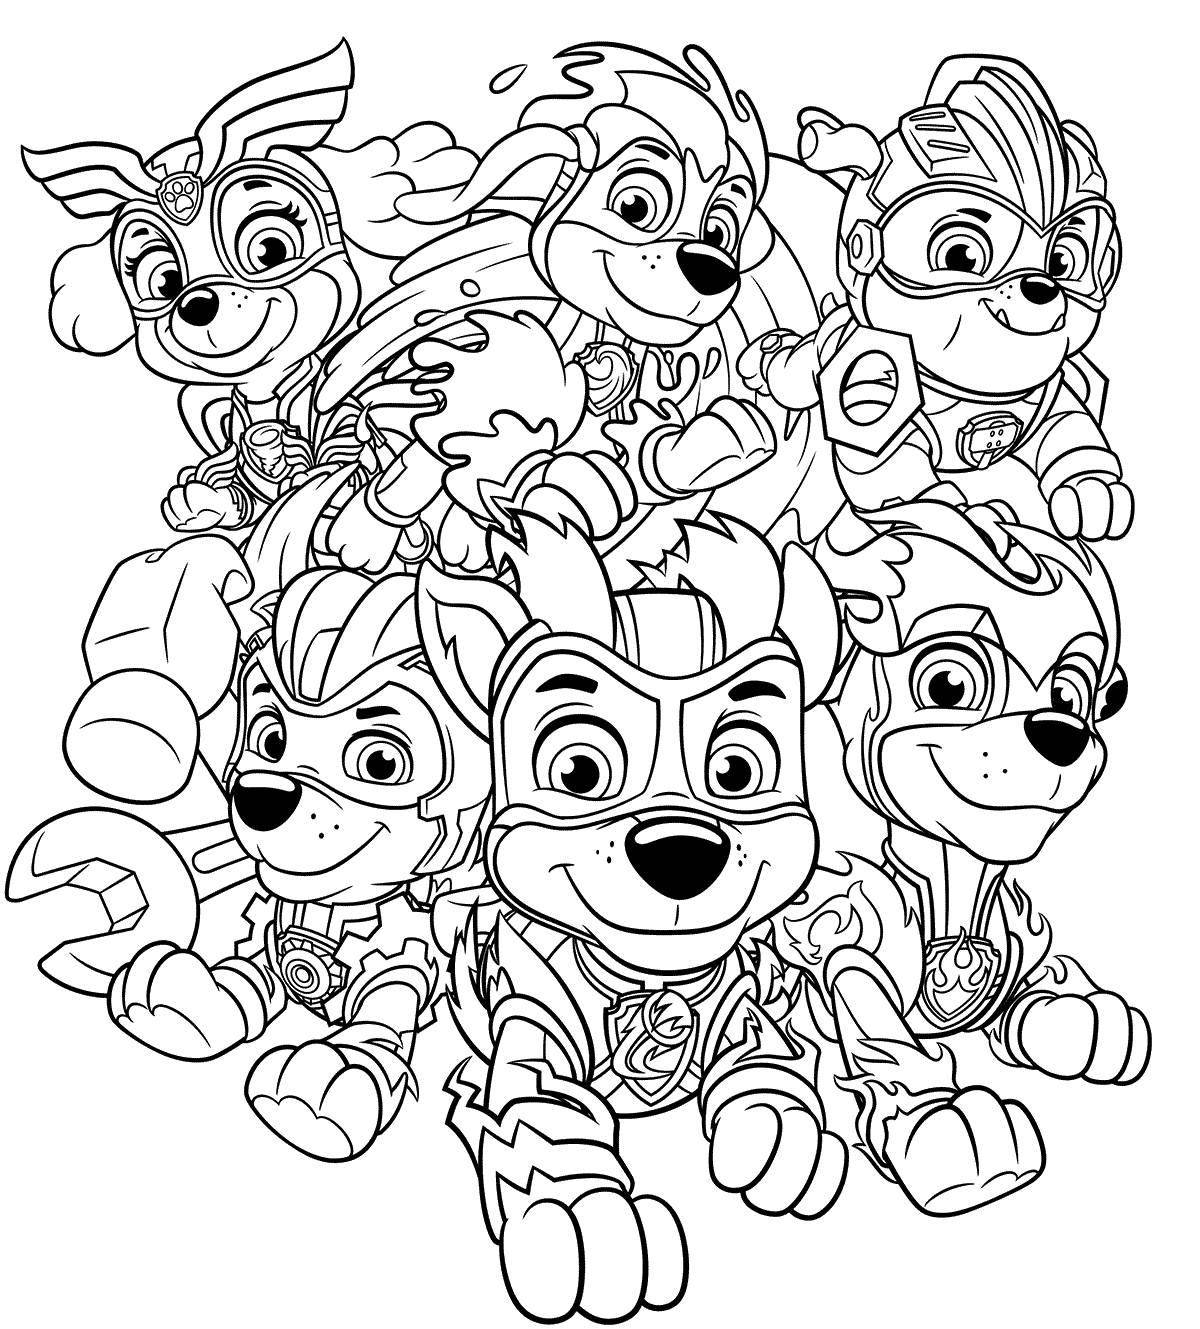 Paw patrol daring coloring page all puppies